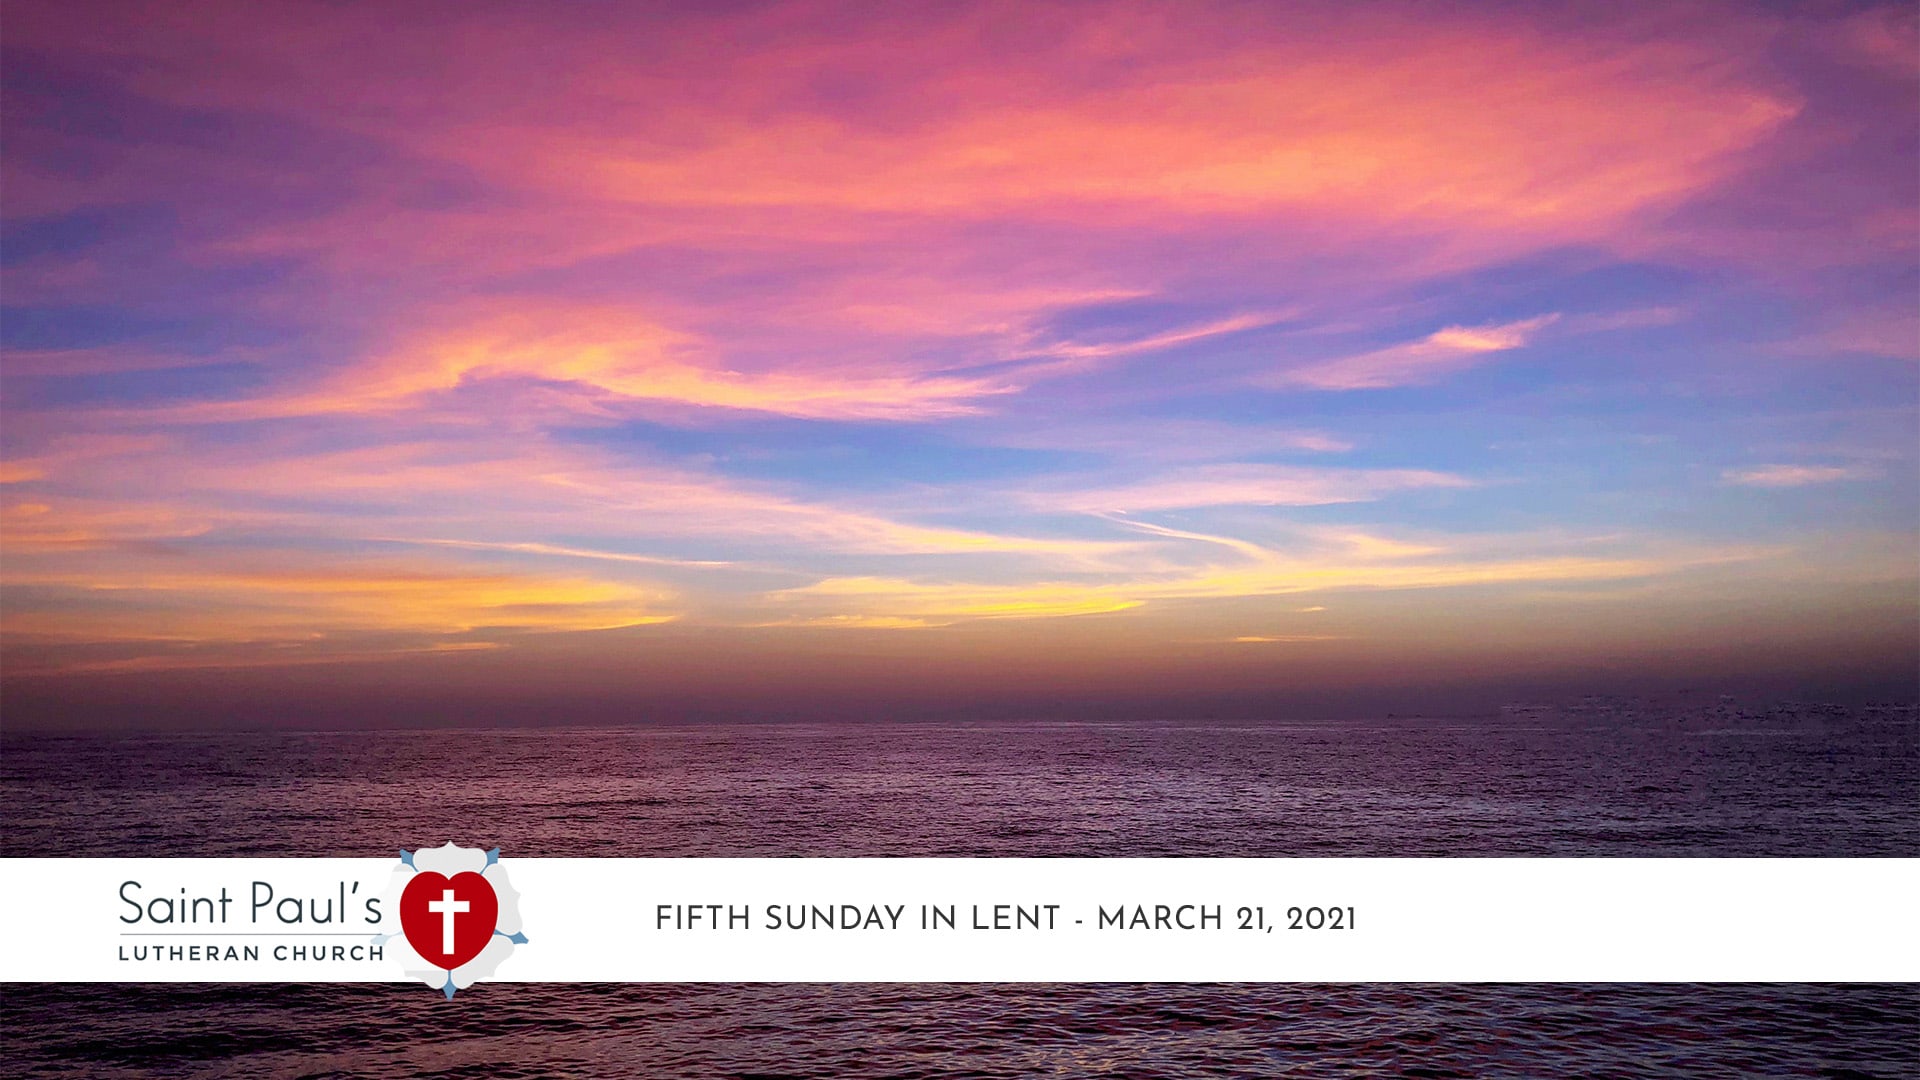 The Fifth Sunday in Lent – March 21, 2021